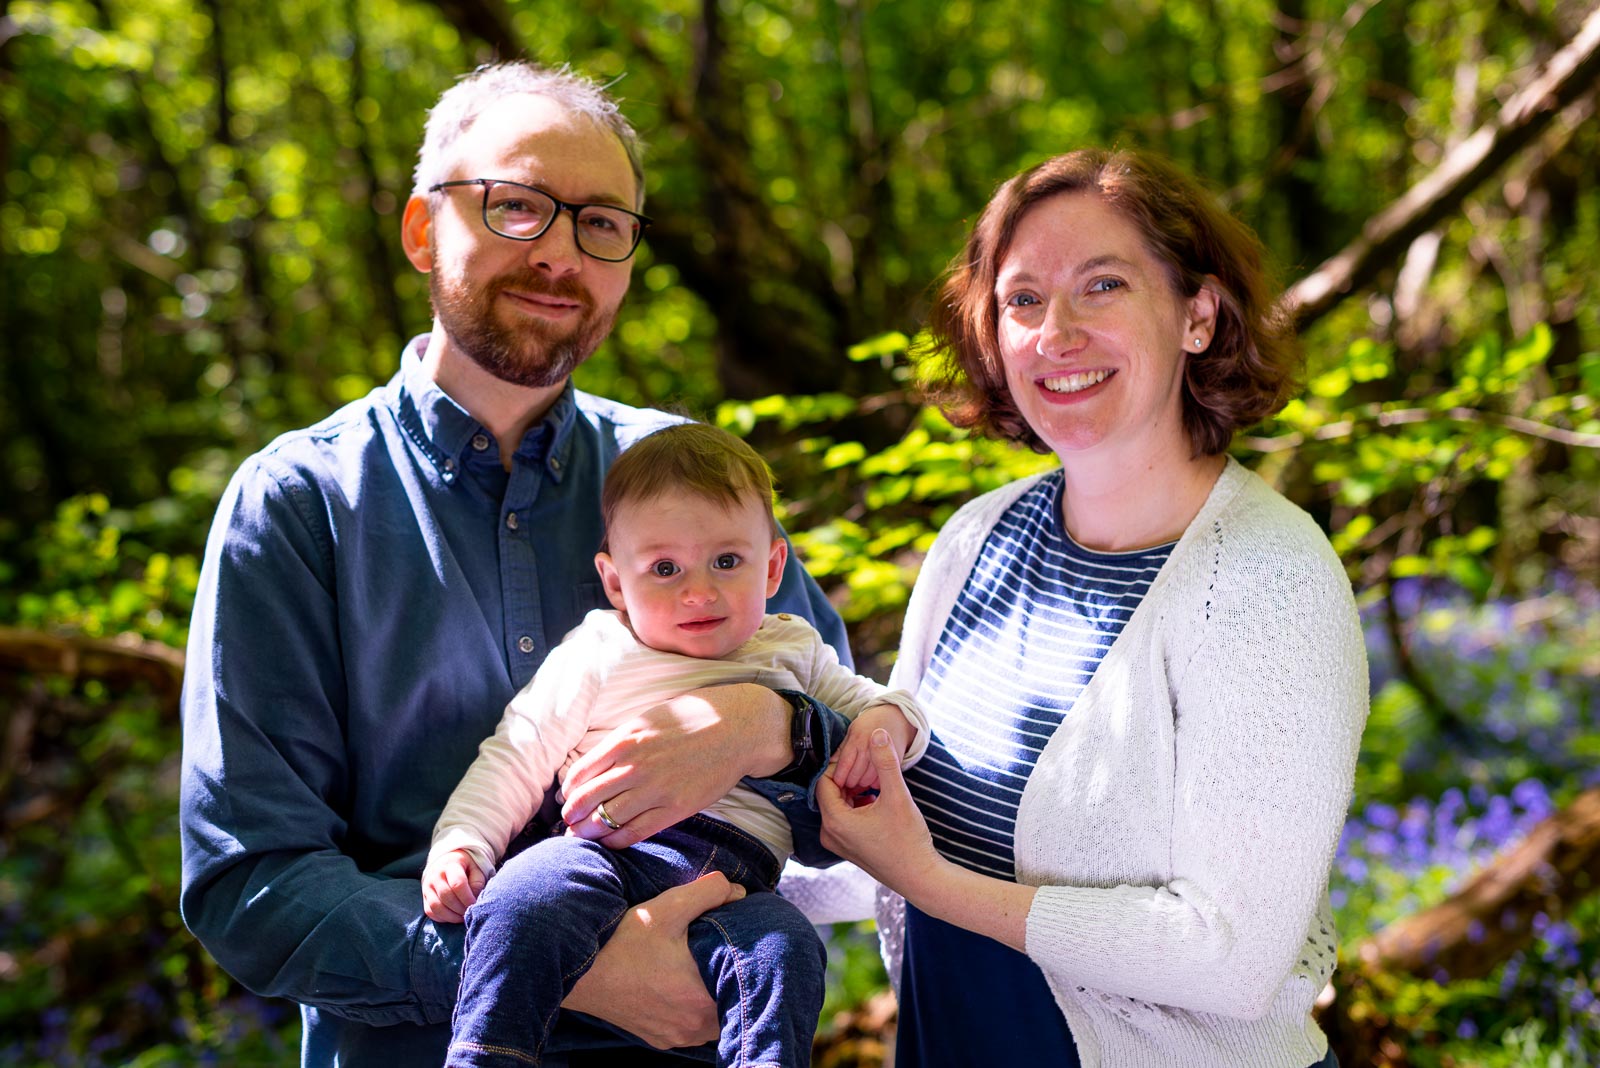 Alexis, Niell and their eight month old baby Alasdair smile at the camera among the bluebells at Battle Great Woods.